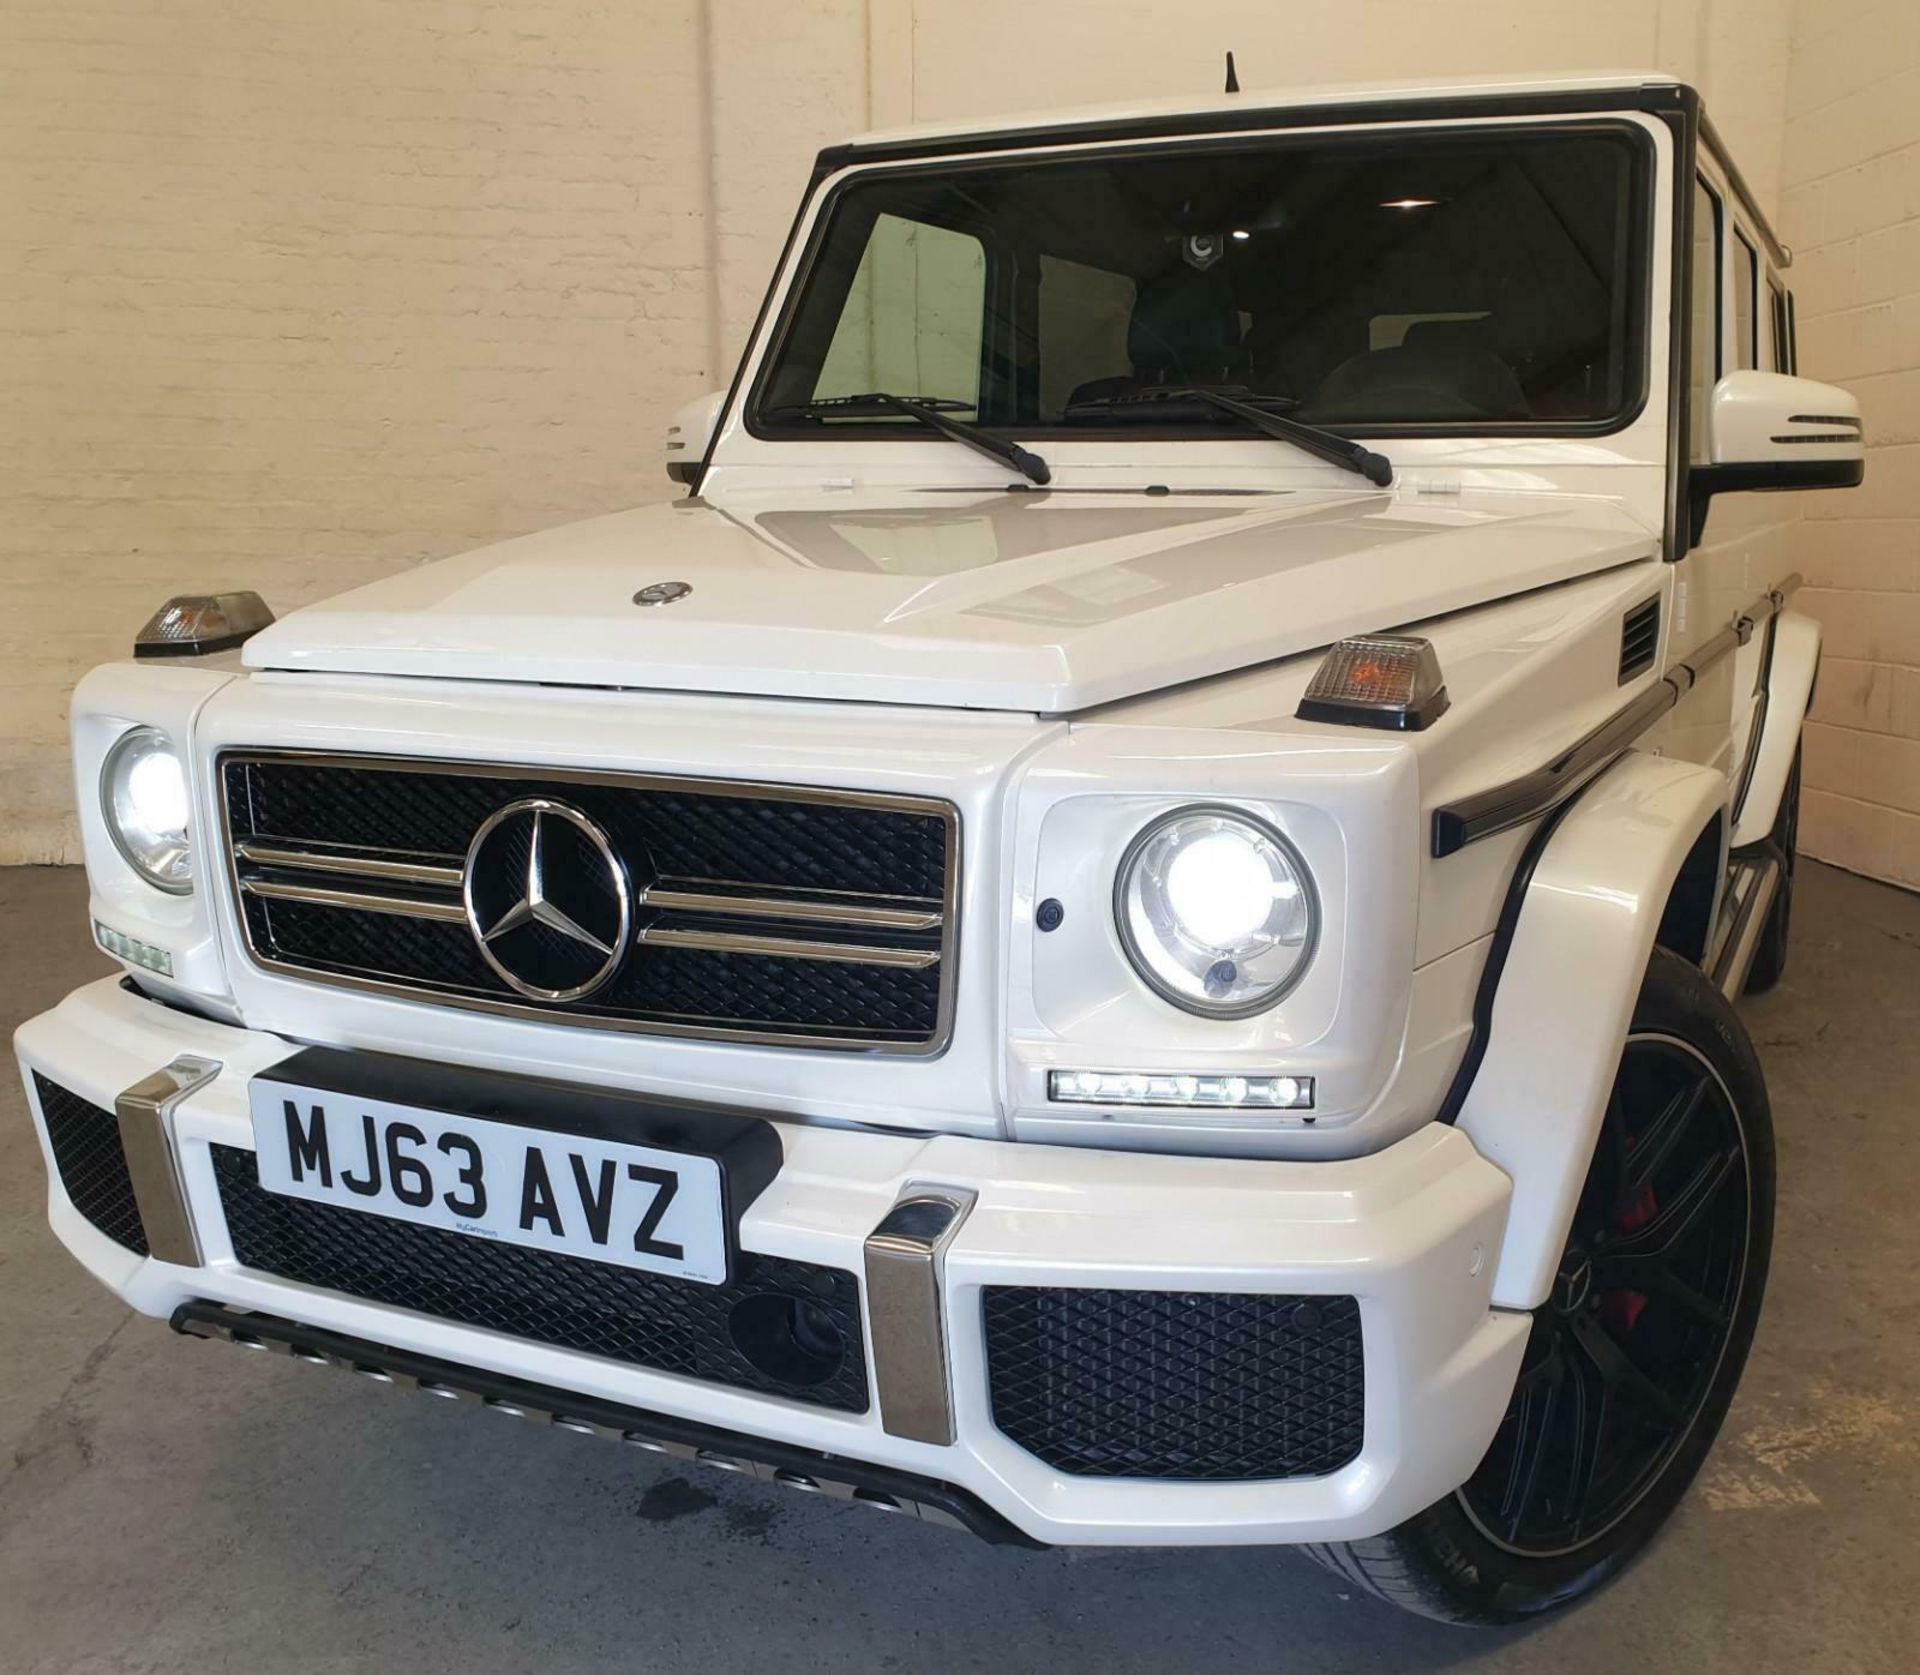 2014/63 REG MERCEDES-BENZ G63 AMG 5.5L AUTOMATIC, SHOWING 0 FORMER KEEPERS *NO VAT* - Image 4 of 12